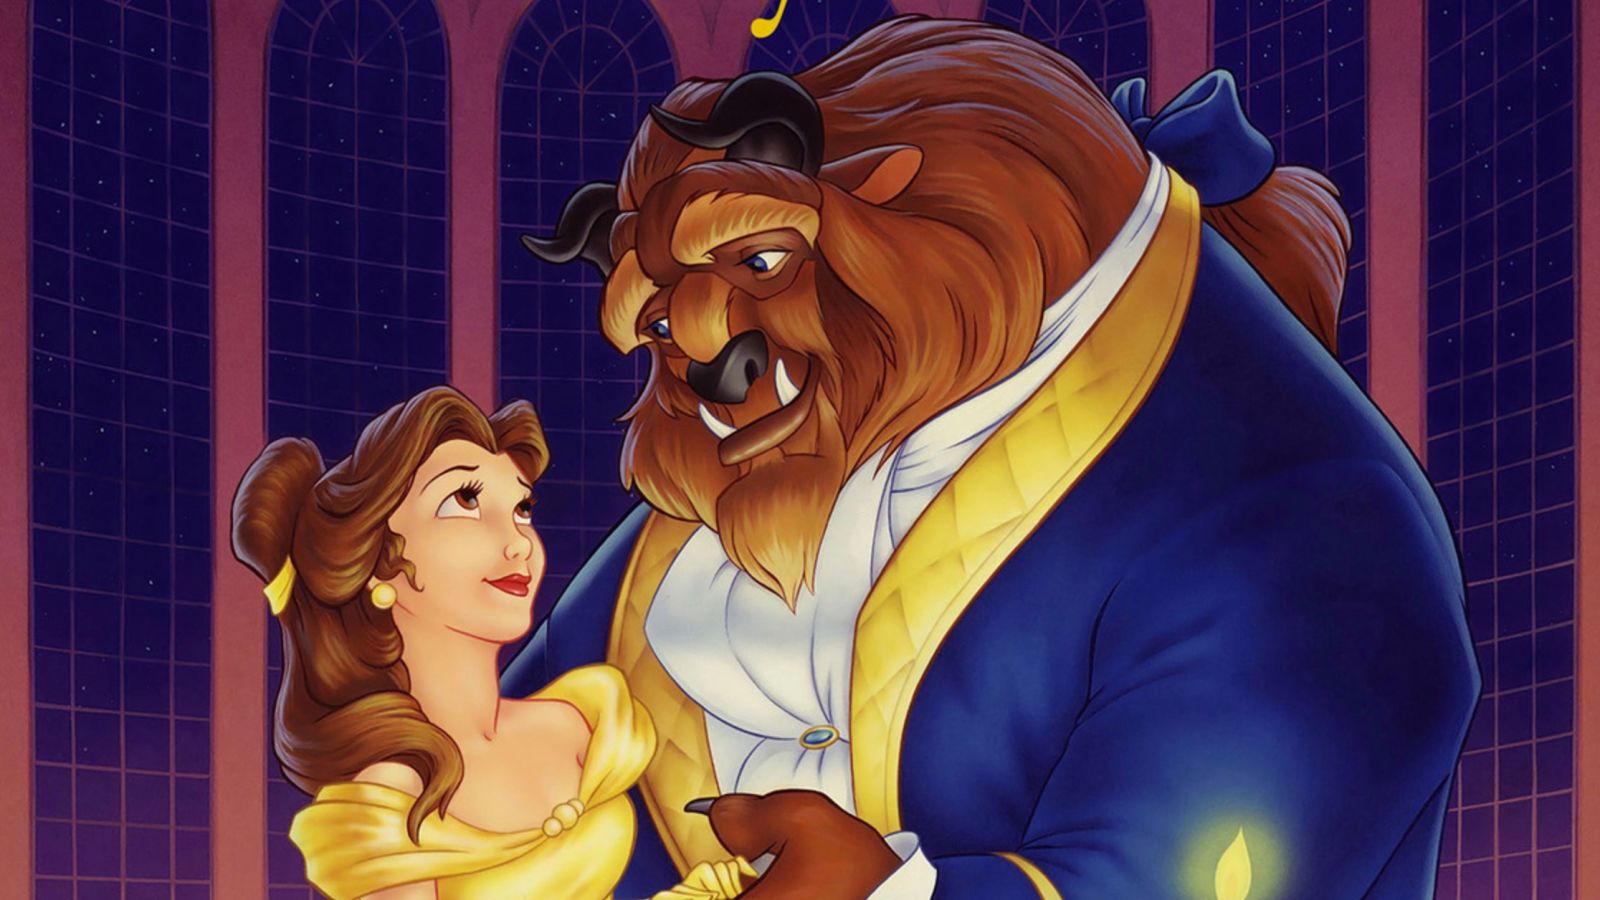 Something There: Beauty and the Beast at 30.